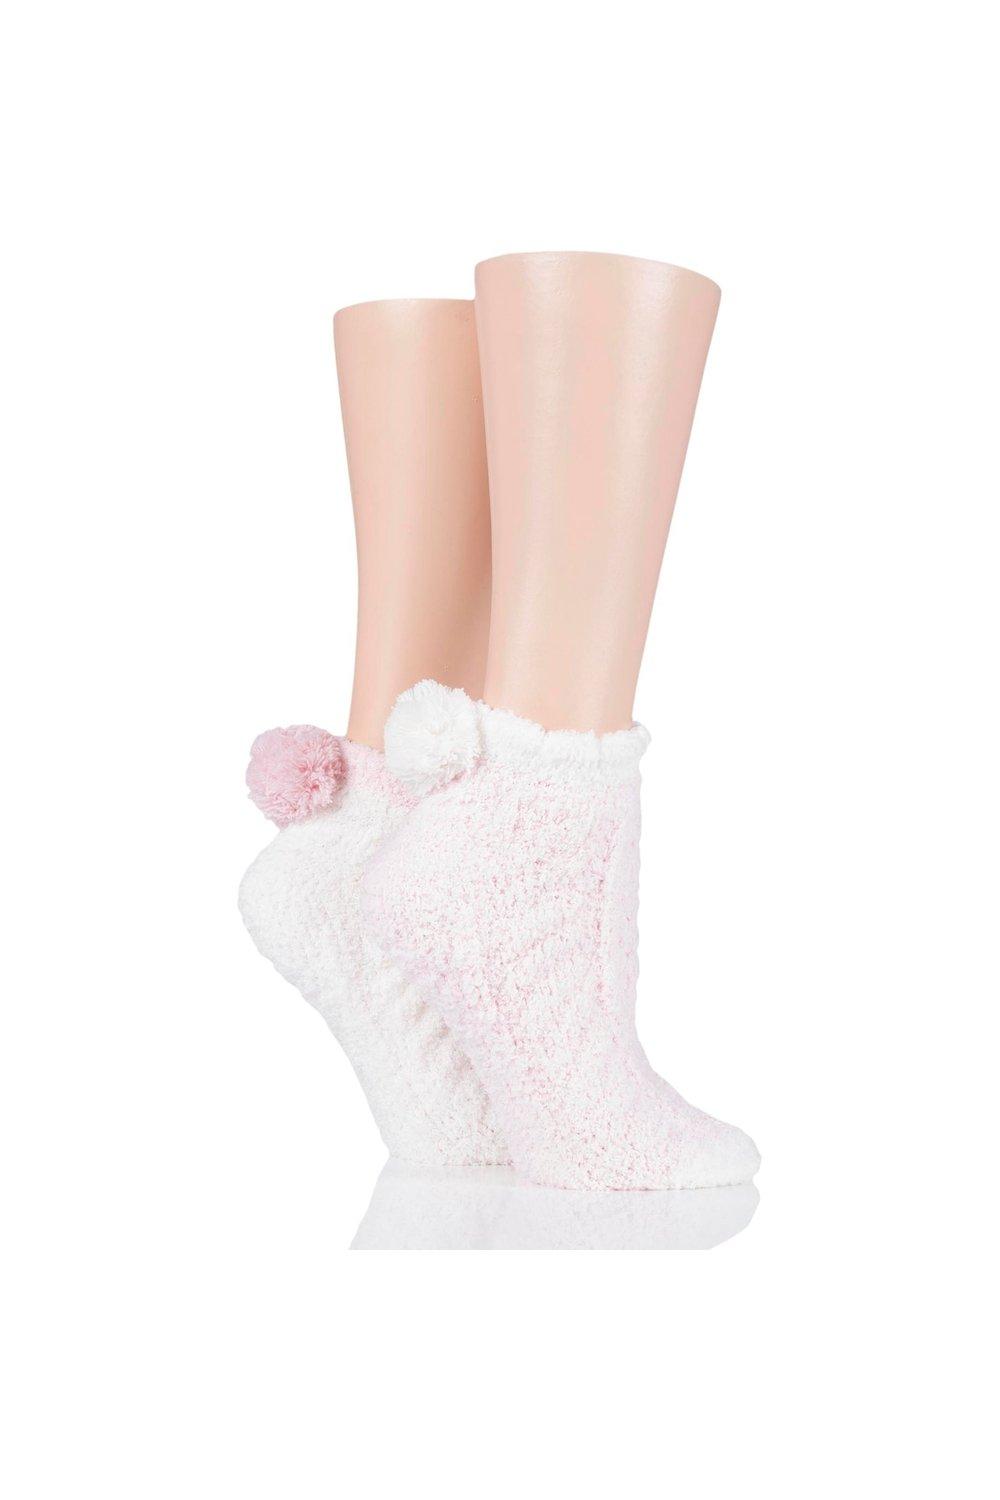 2 Pair Cable Cosy Anklet Socks with Pom Poms